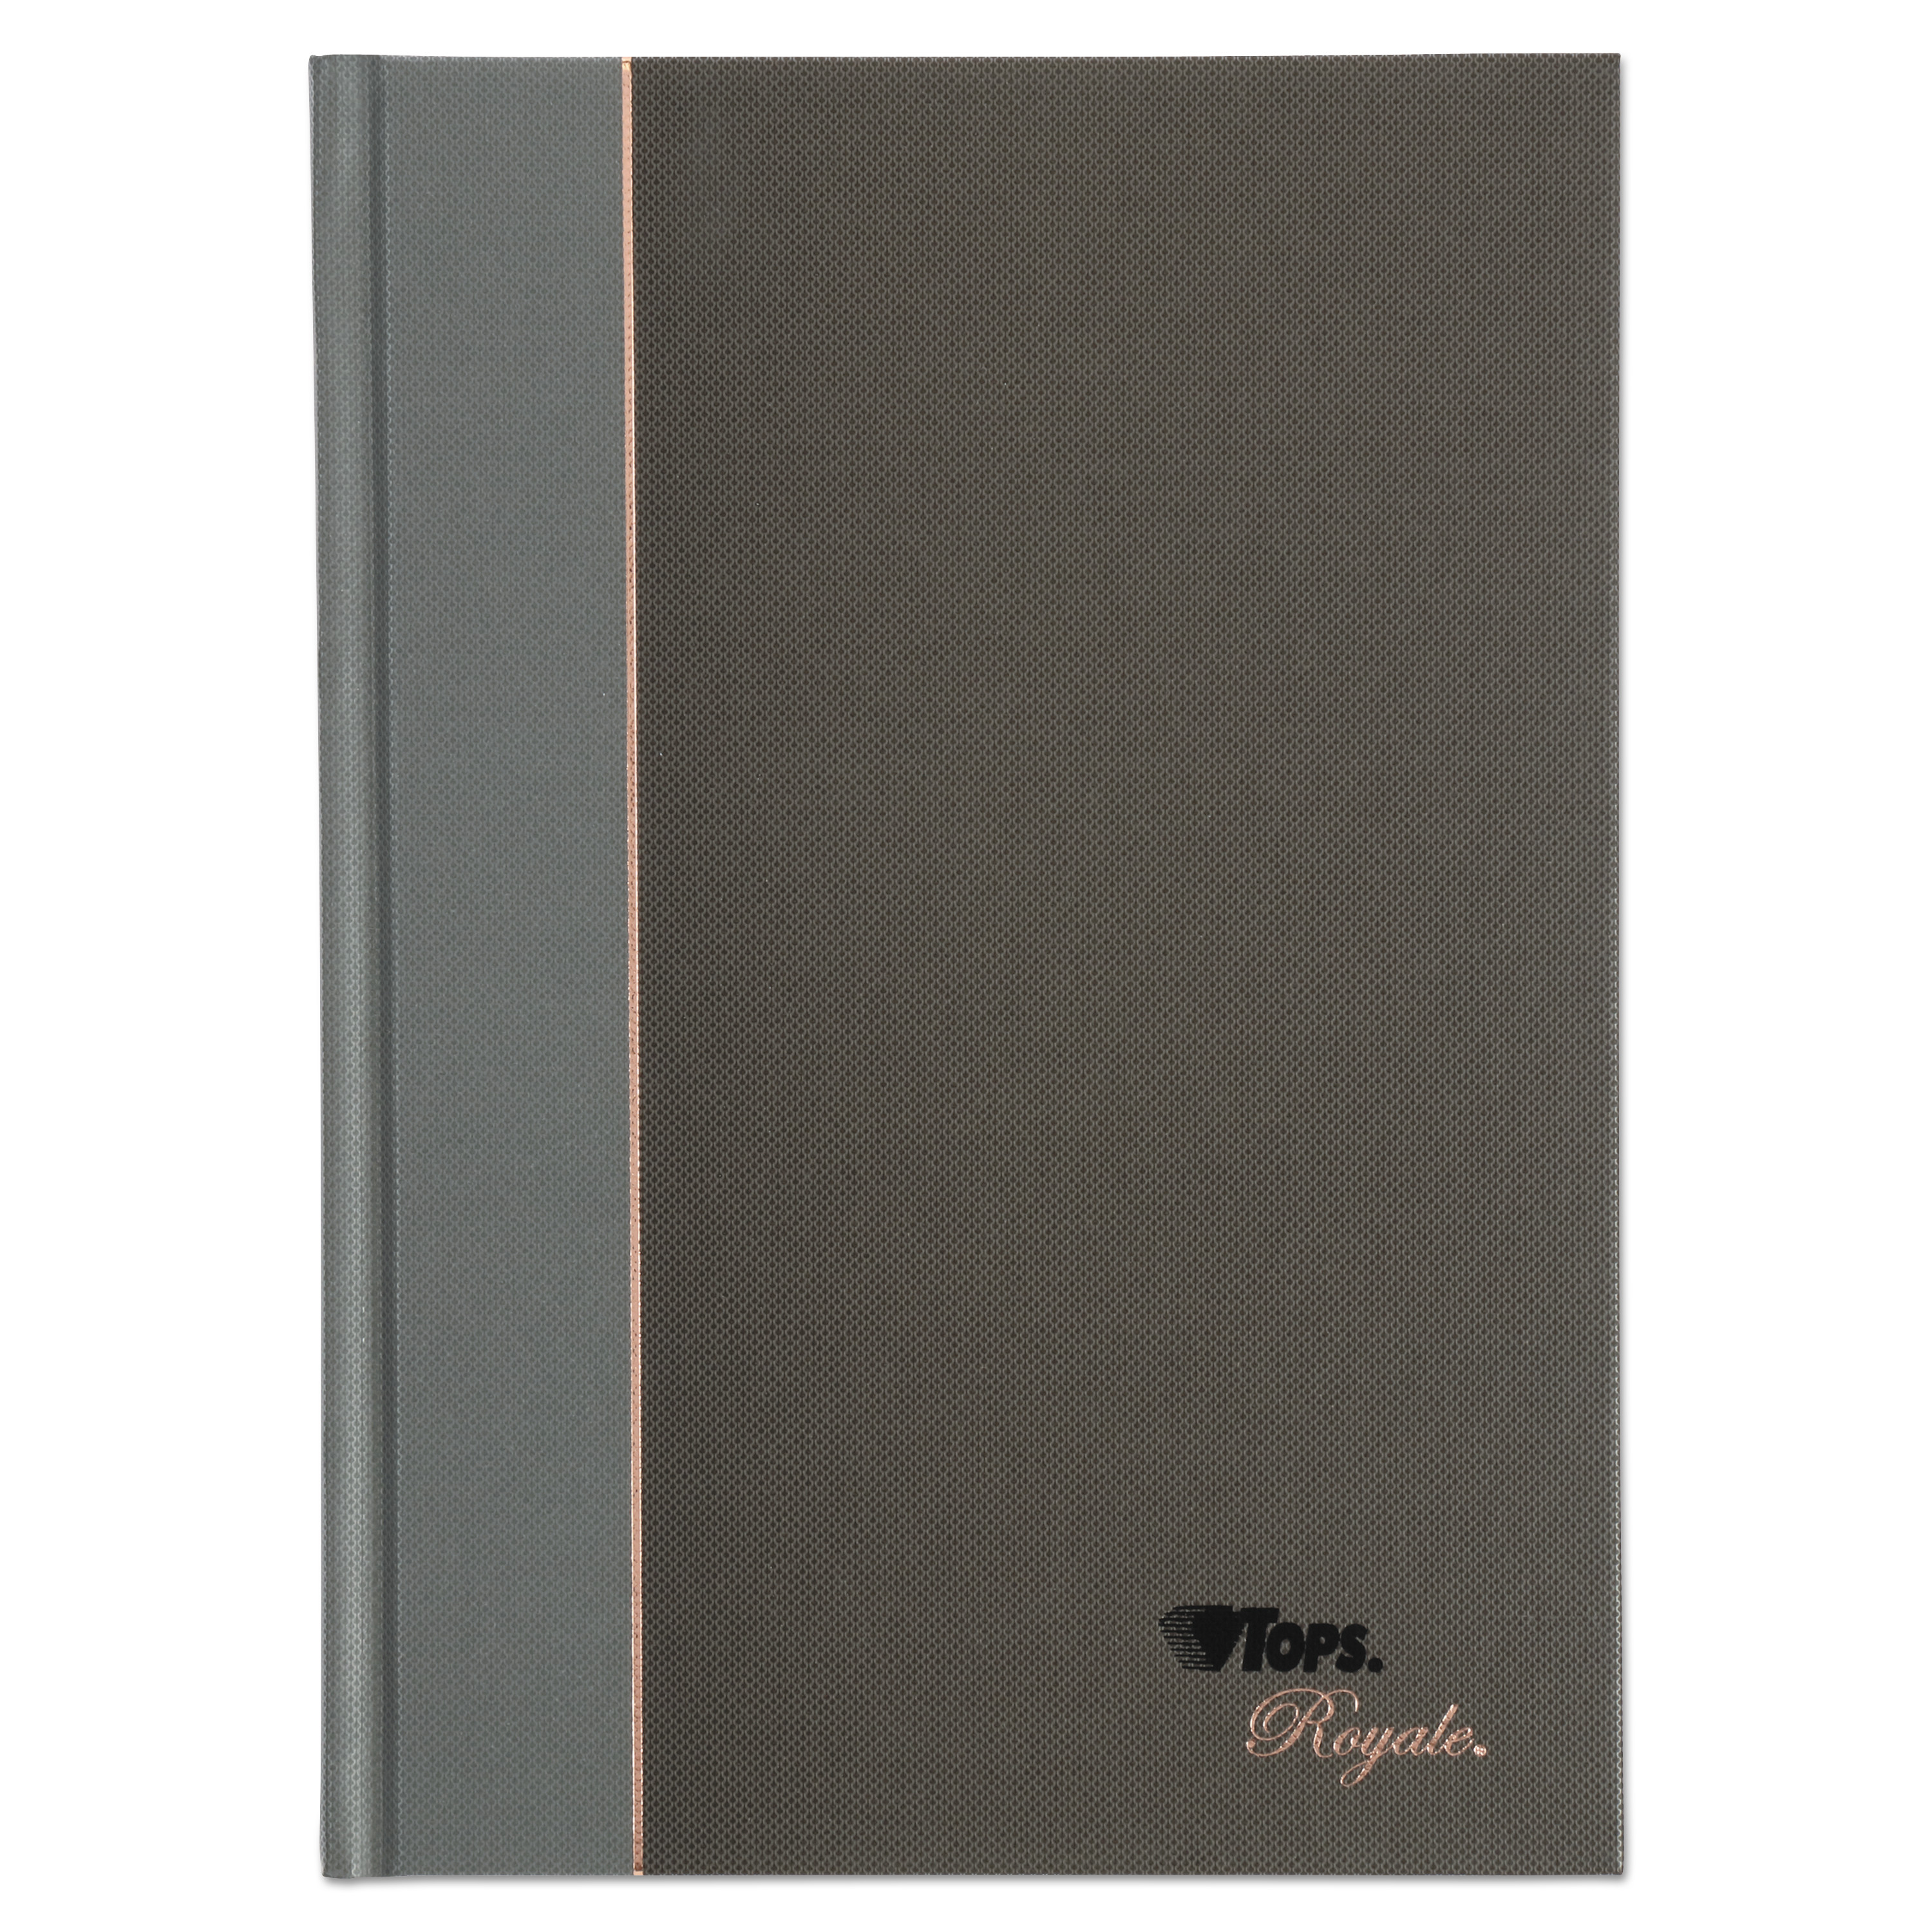  TOPS 25230 Royale Casebound Business Notebook, College, Black/Gray, 8.25 x 5.88, 96 Sheets (TOP25230) 